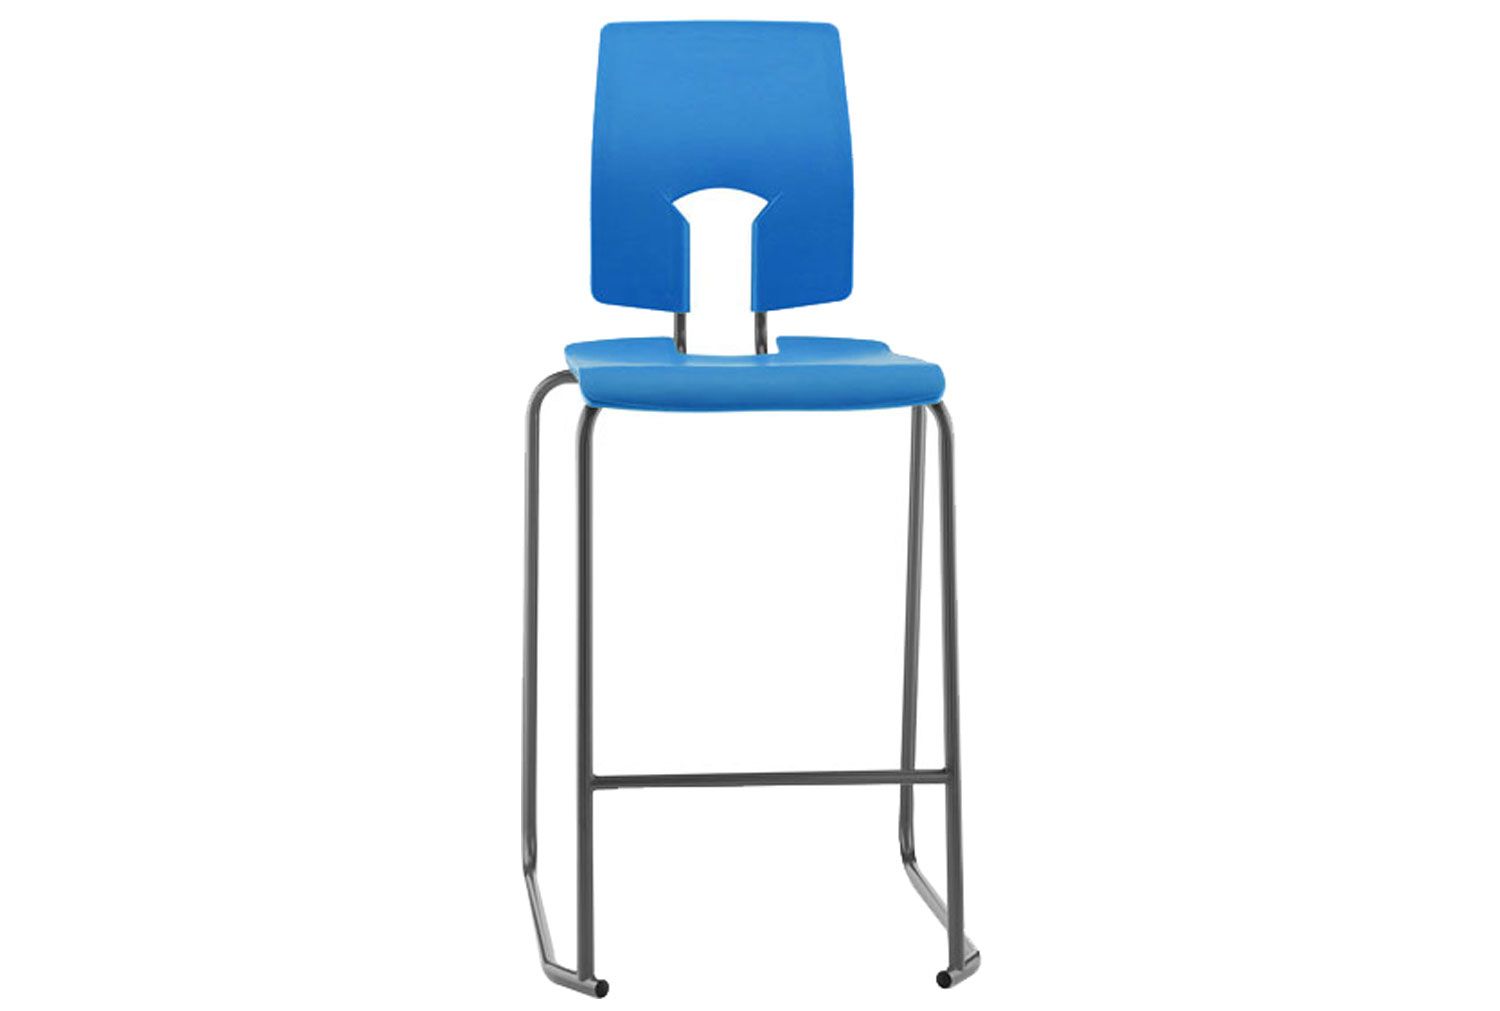 Qty 6 - Hille SE Ergonomic Classroom Stool With Back, 69h (cm), Dark Grey Frame, Pacific Blue